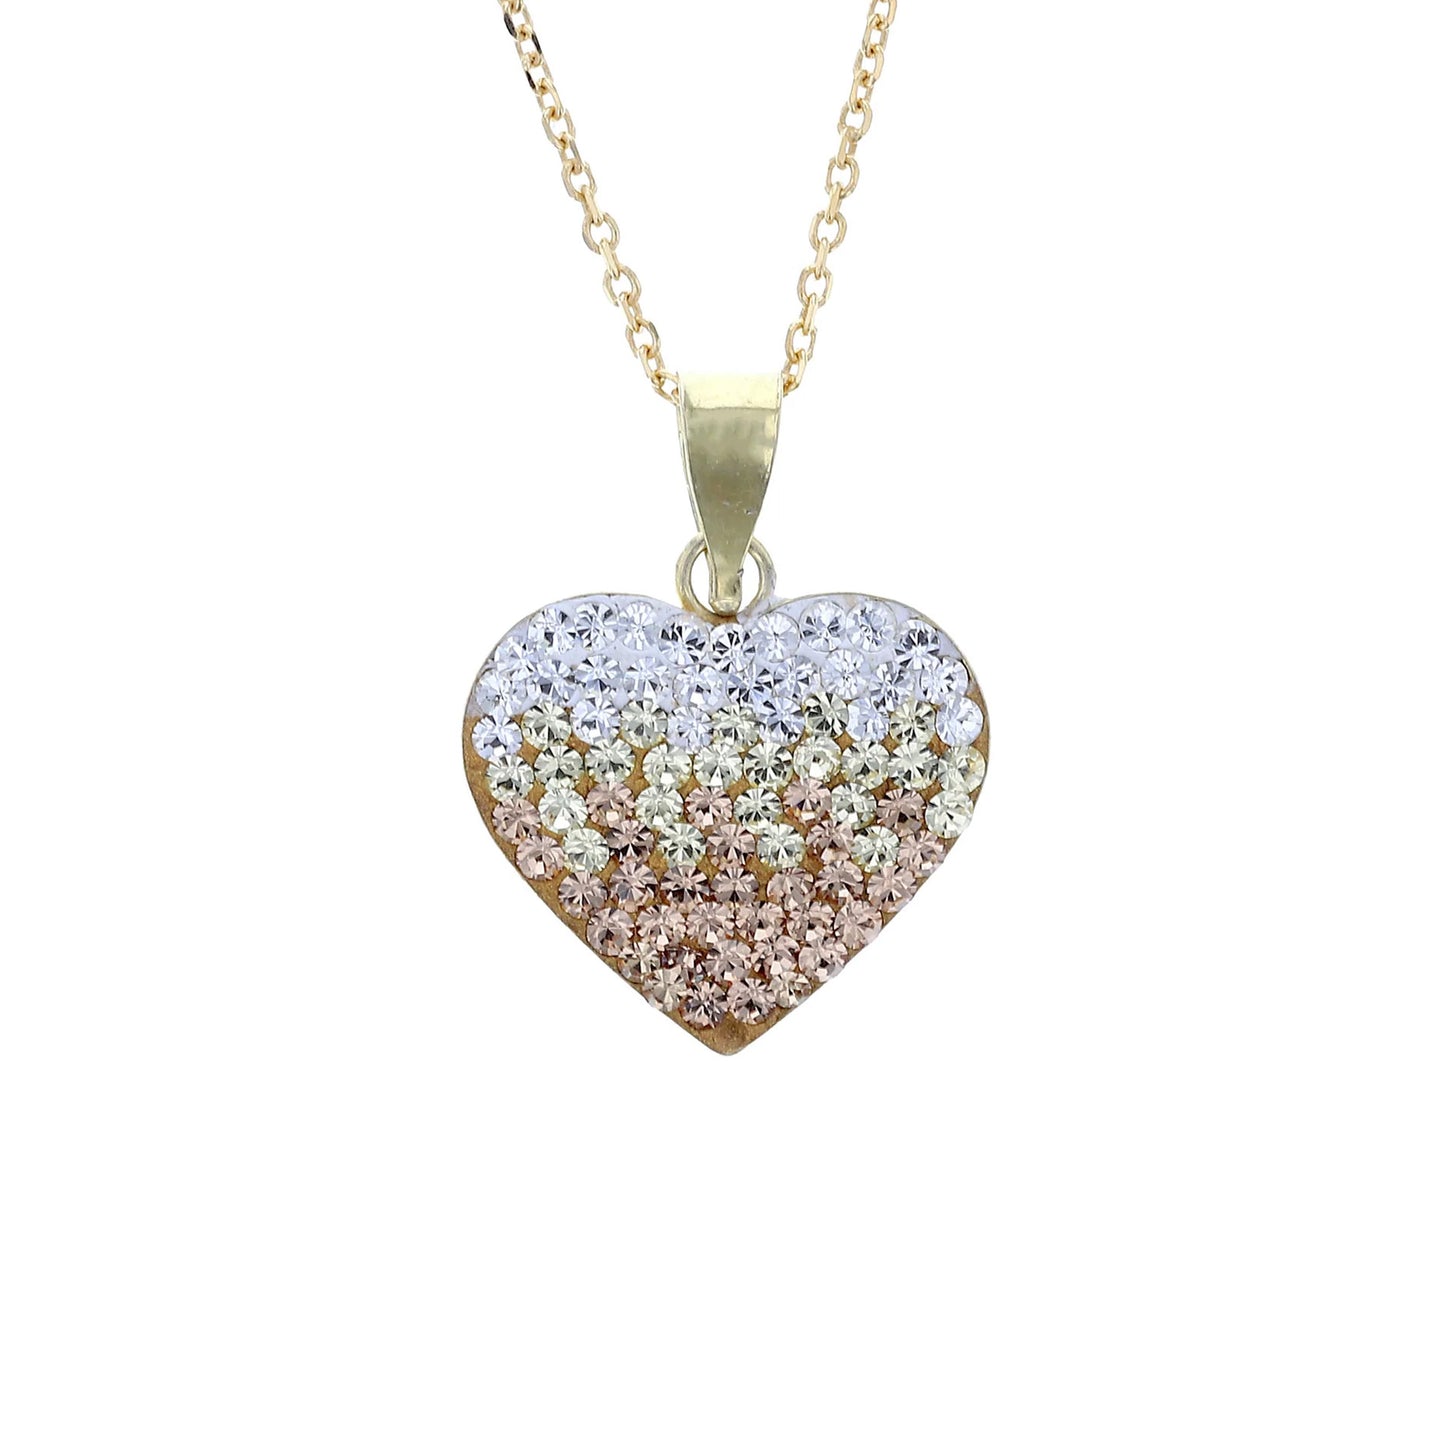 18K Gold Plated Sterling Silver Puffed Heart with Light Colorado Topaz, Jonquil, and White Crystal